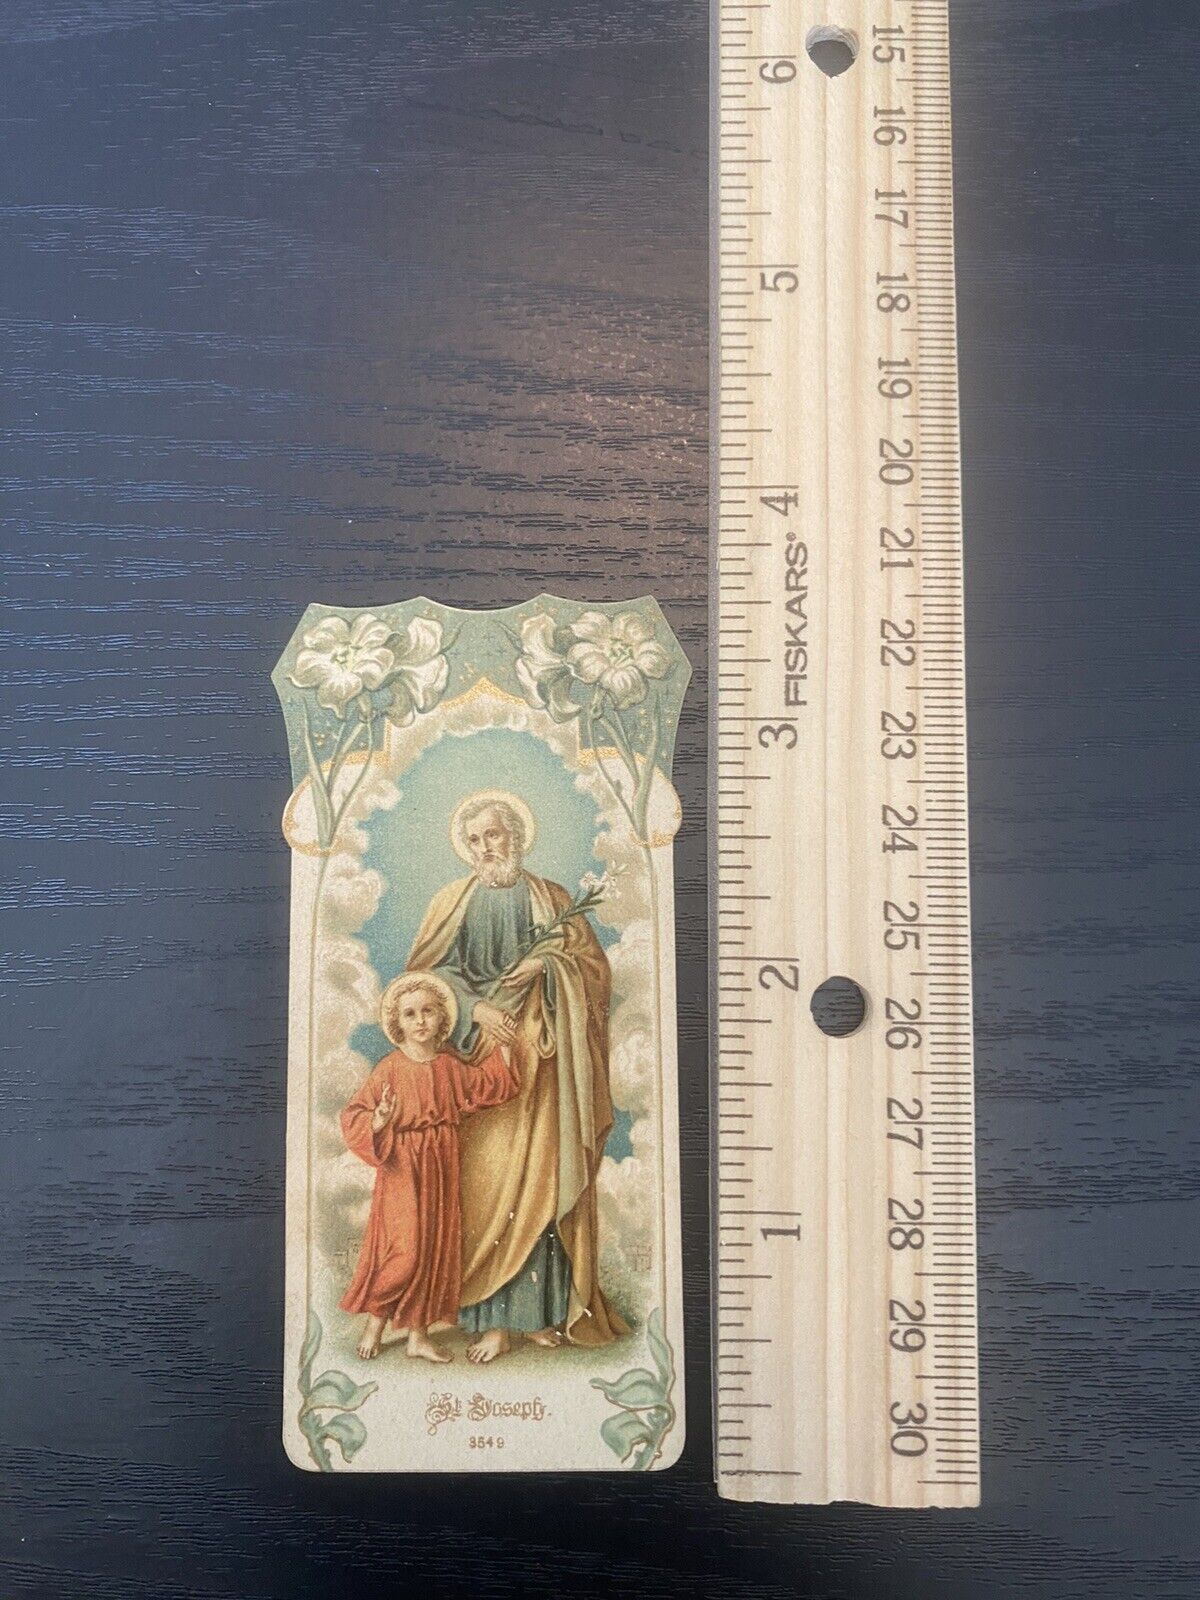 Antique Catholic Prayer Card Religious Collectible 1890's Holy Card. St Jospeh